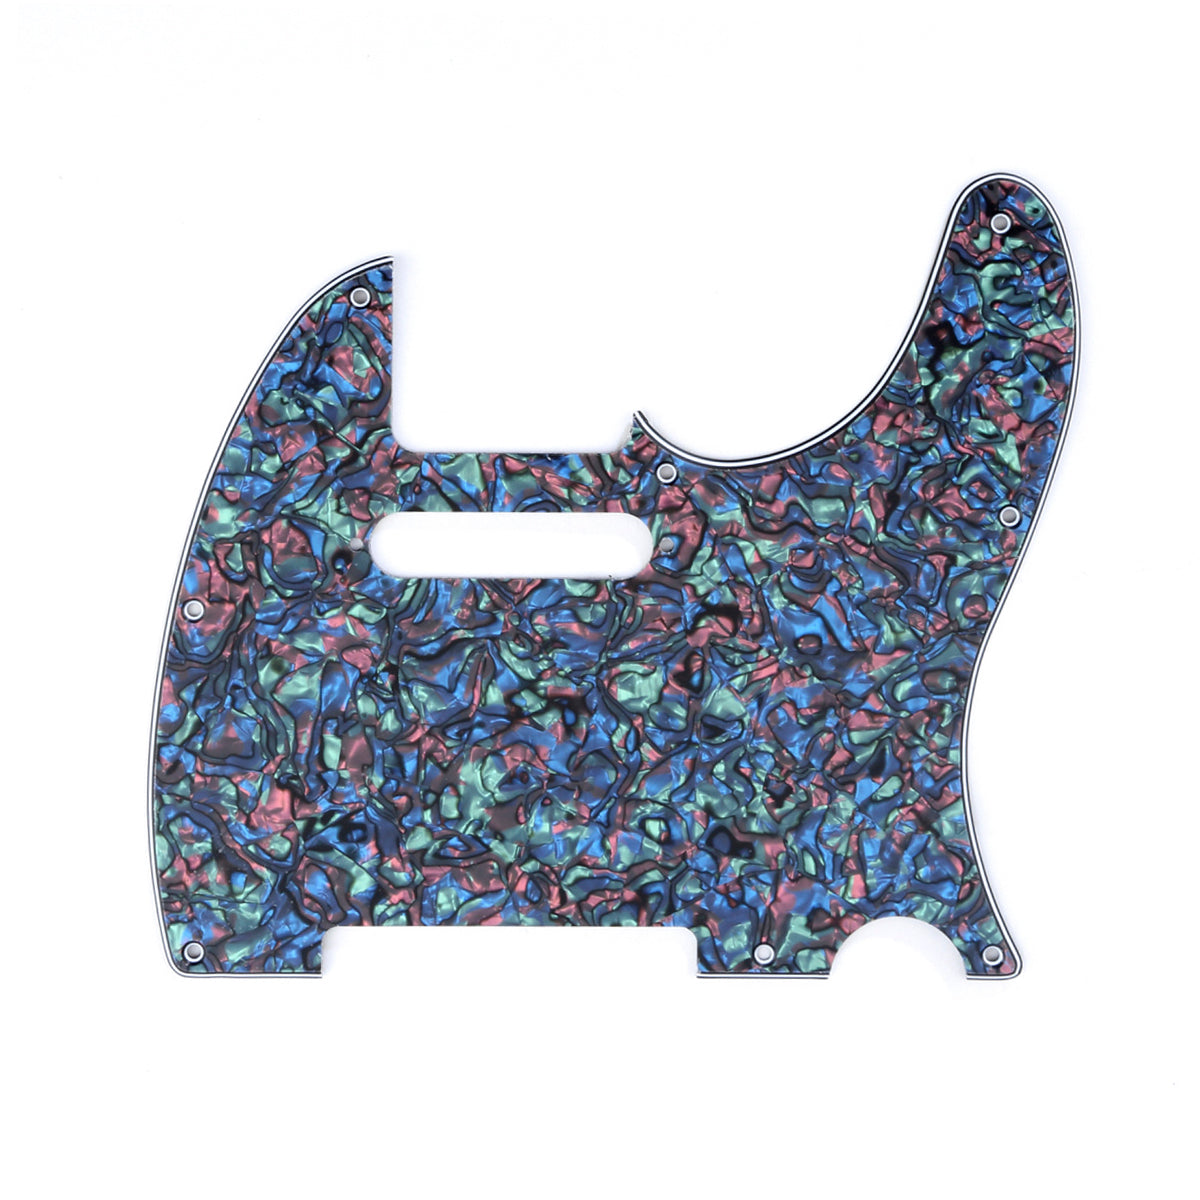 Musiclily 8 Hole Tele Guitar Pickguard for USA/Mexican Made Fender Standard Telecaster Modern Style, 4Ply Abalone Shell